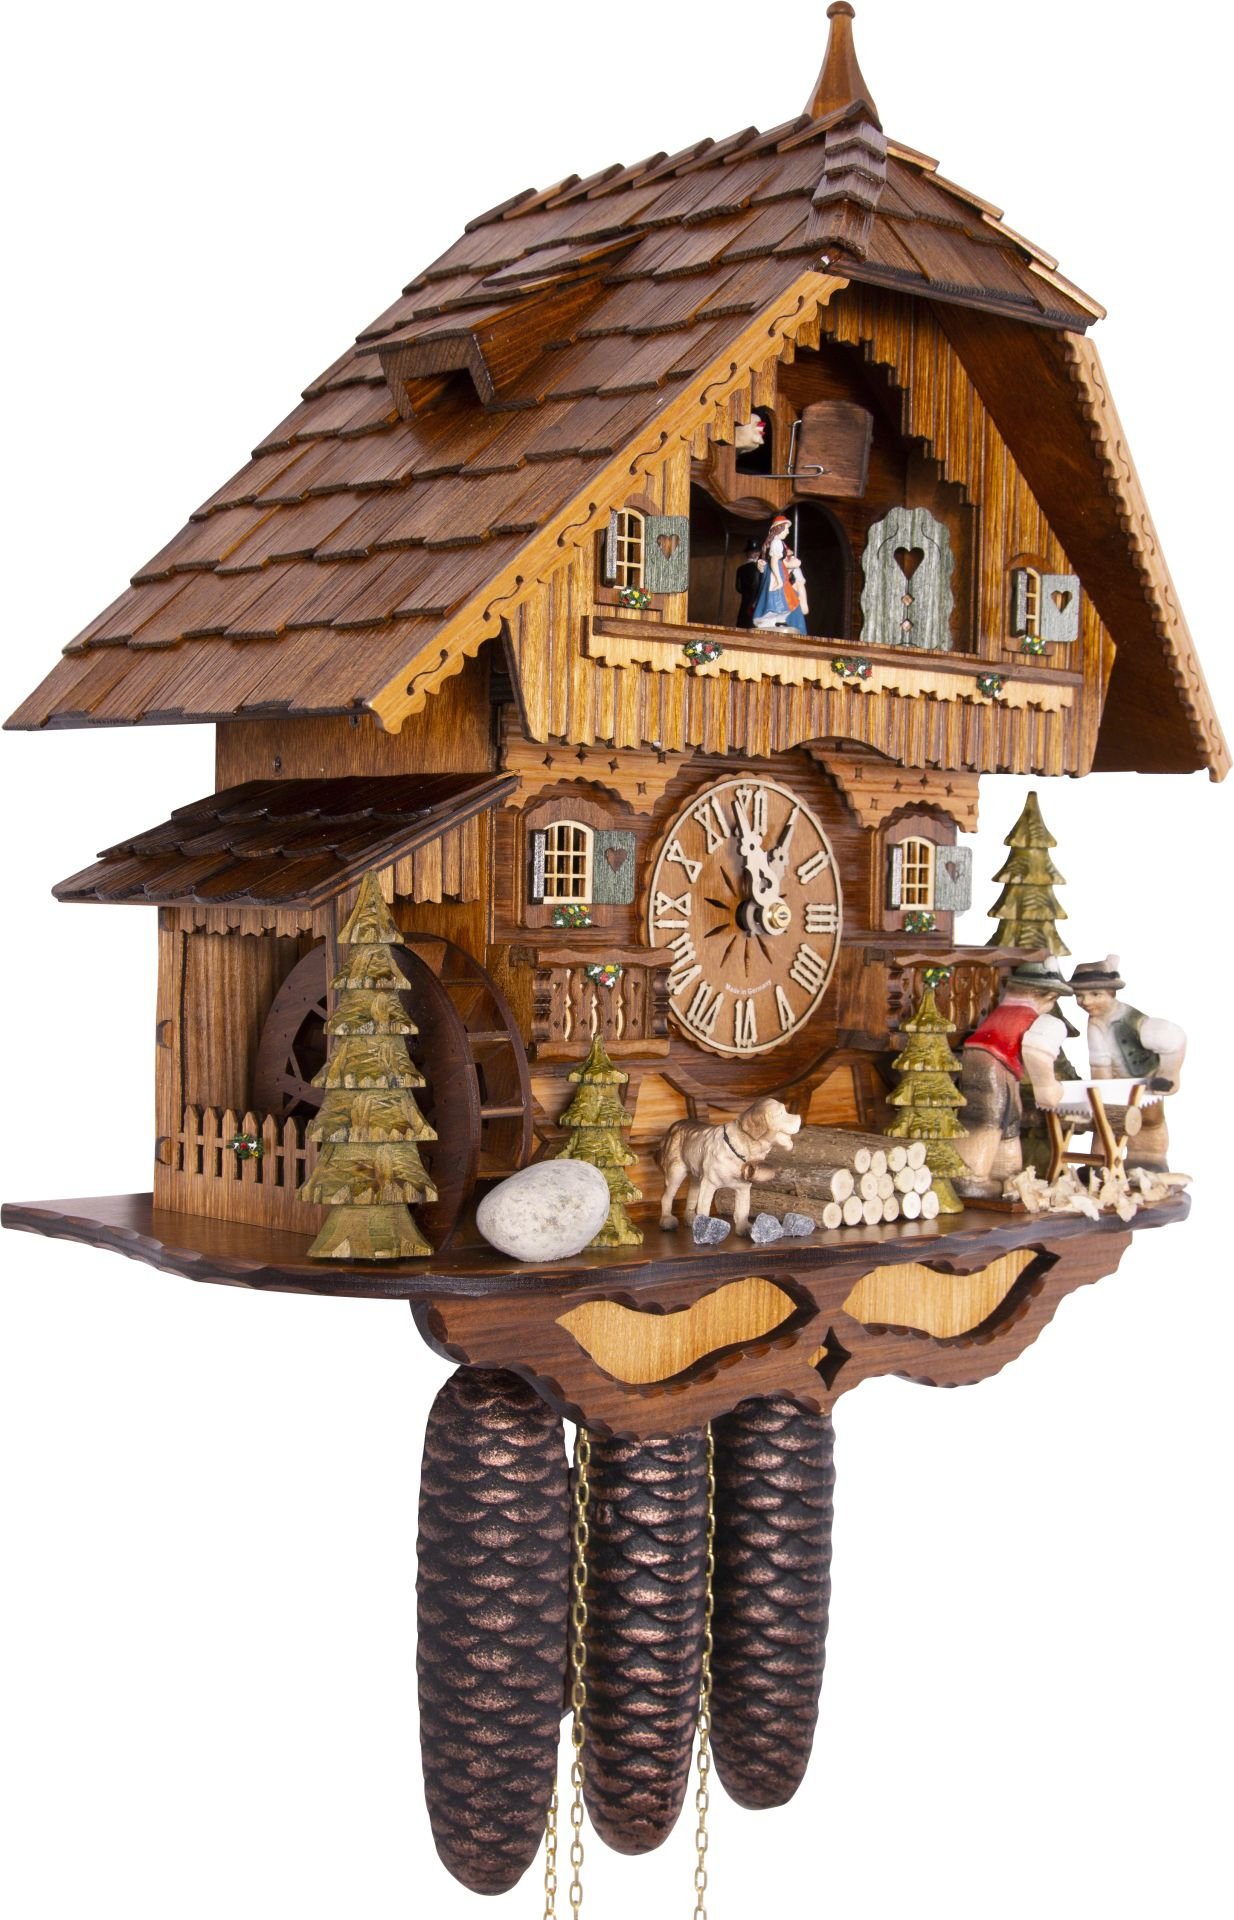 Cuckoo Clock Chalet Style 8 Day Movement 46cm by Hekas